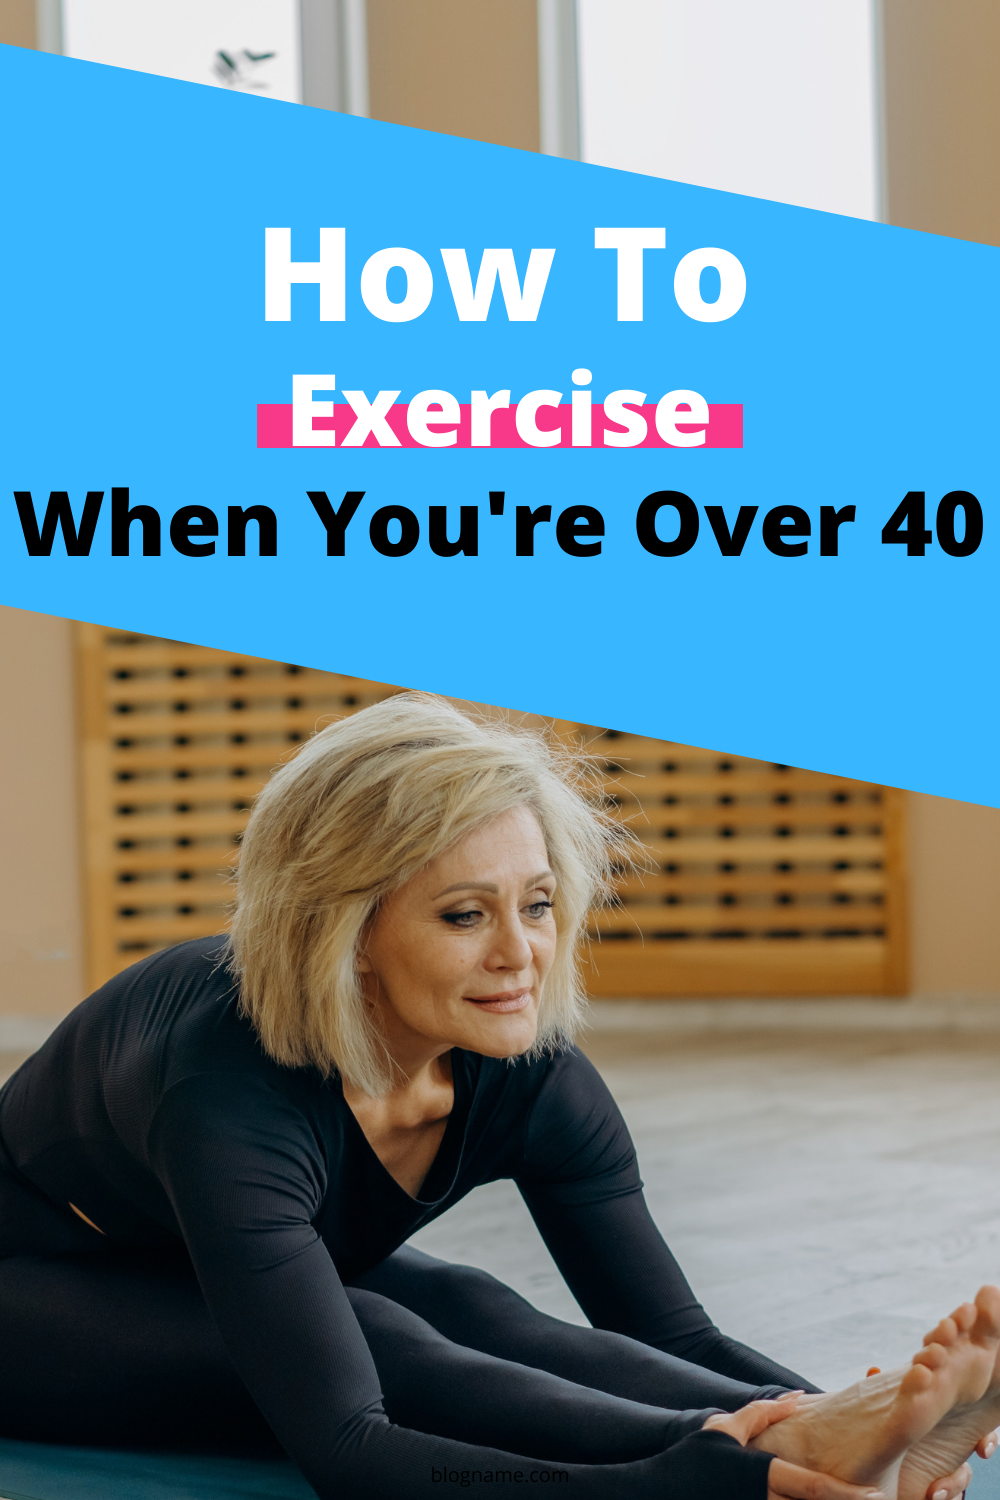 How to Exercise When You’re Over 40 | by Mia Writes | Medium